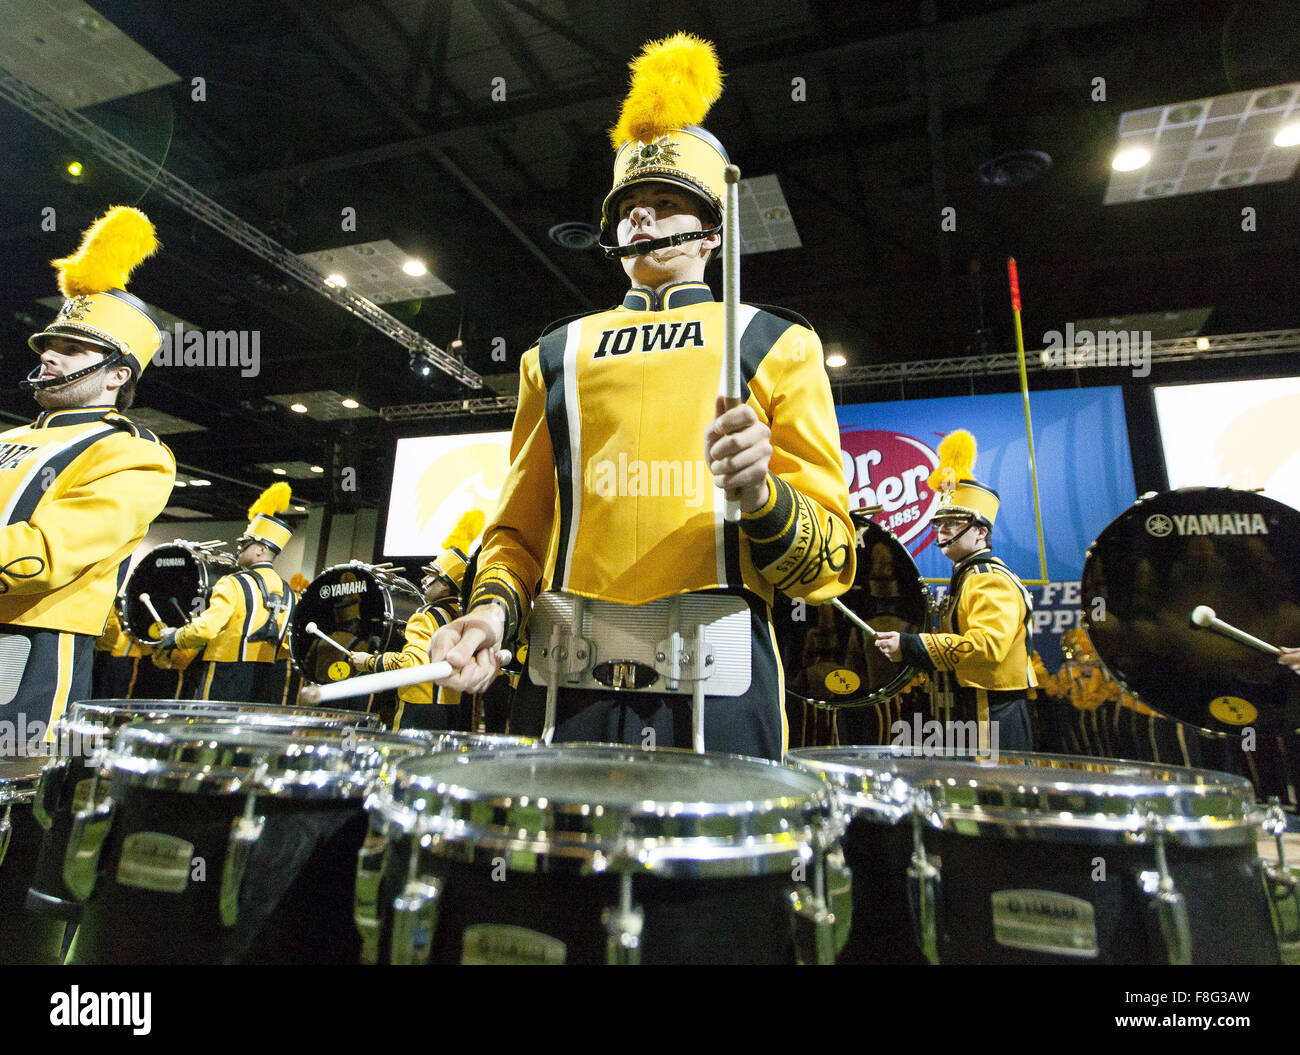 Indianapolis, Iowa, USA. 5th Dec, 2015. The Iowa Drumline performs at the Big Ten Experience at the Indiana Convention Center in Indianapolis, In., Saturday, Dec. 5th, 2015. © Louis Brems/Quad-City Times/ZUMA Wire/Alamy Live News Stock Photo